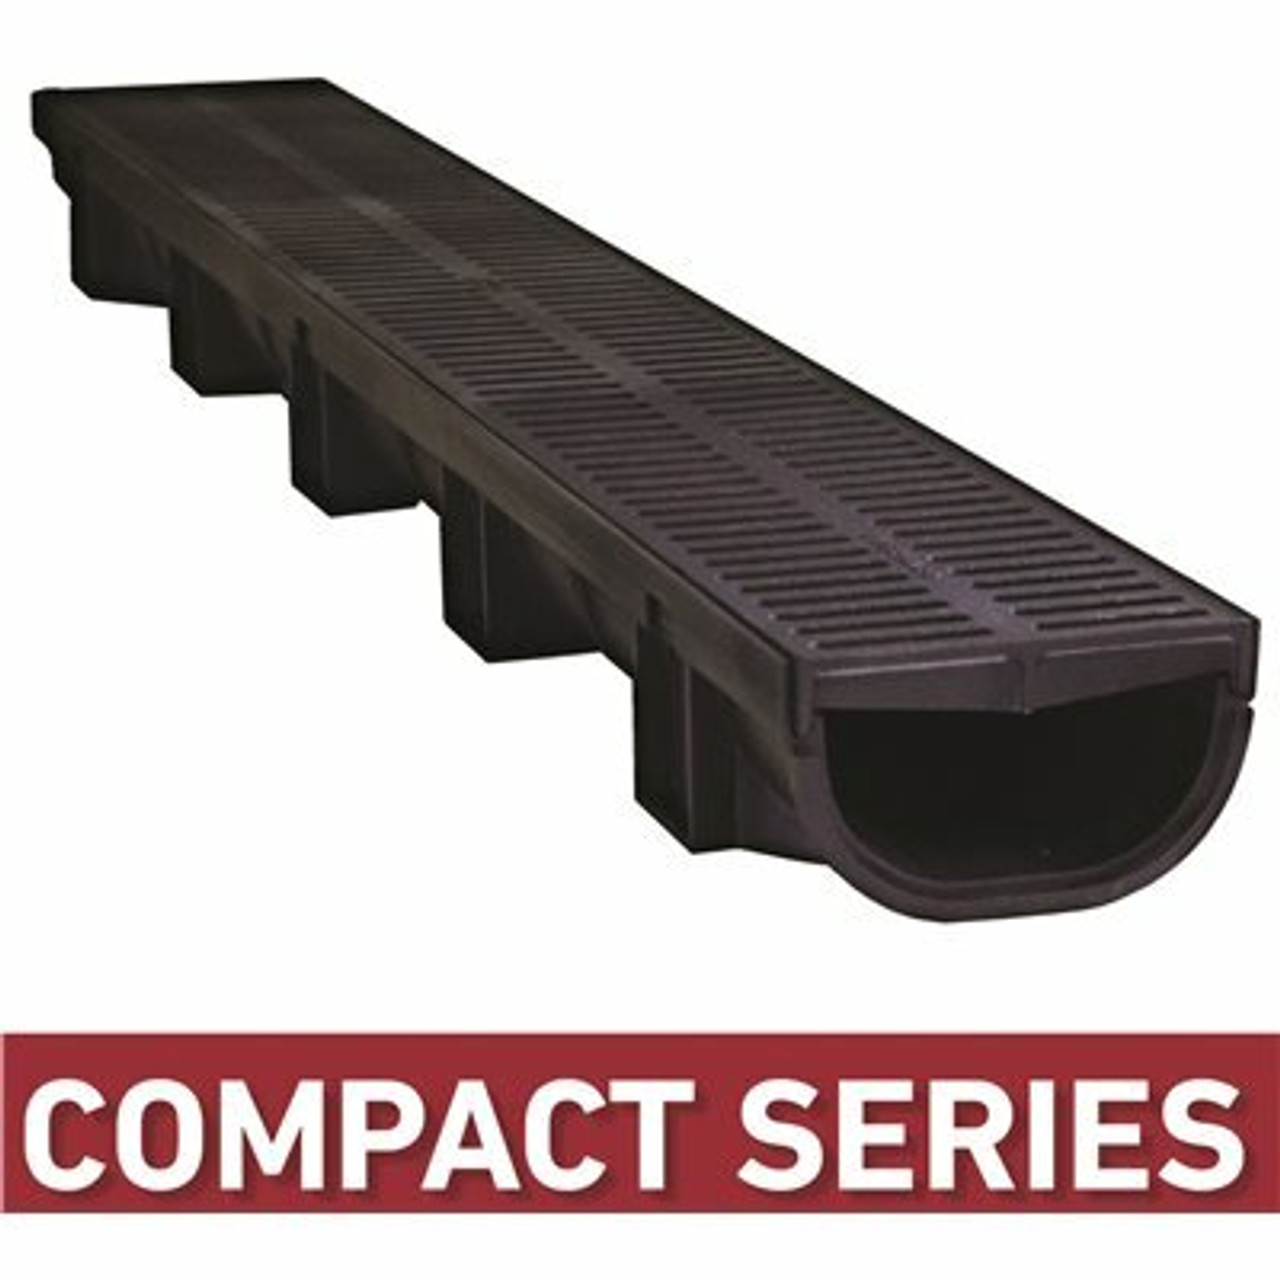 U.S. Trench Drain Compact Series 5.4 In. W X 3.2 In. D X 39.4 In. L Trench And Channel Drain With Black Grate